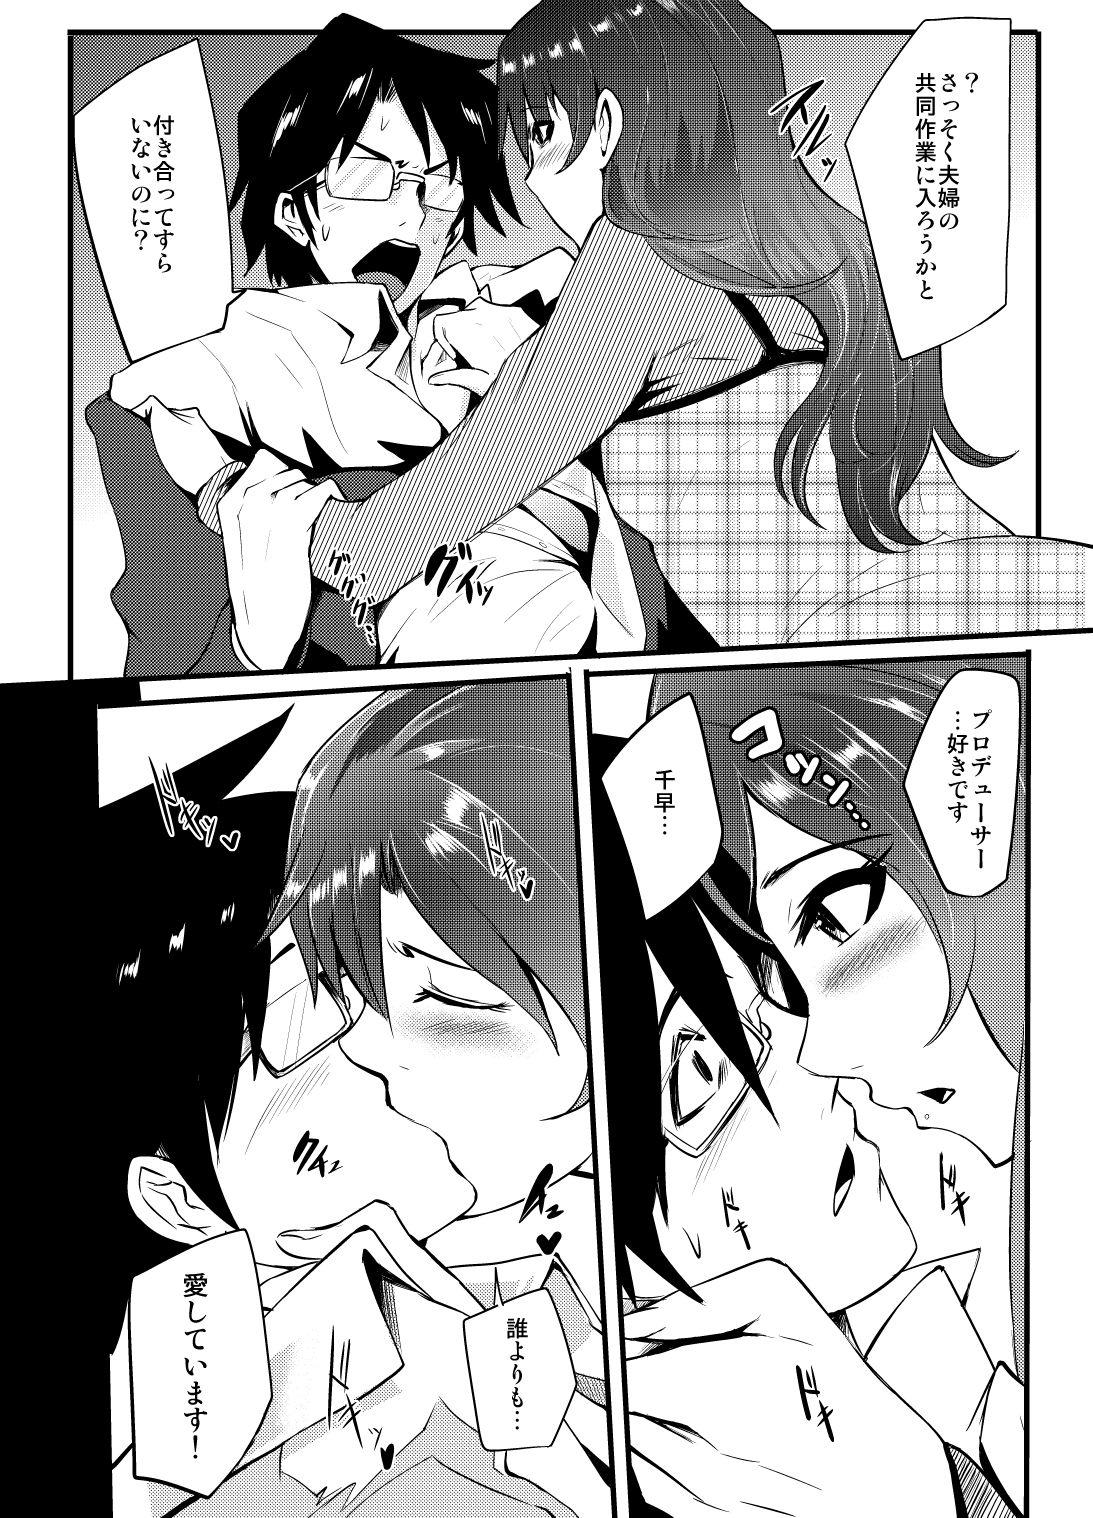 Indoor THEYANDEREM@STER - The idolmaster Celebrity Sex Scene - Page 7